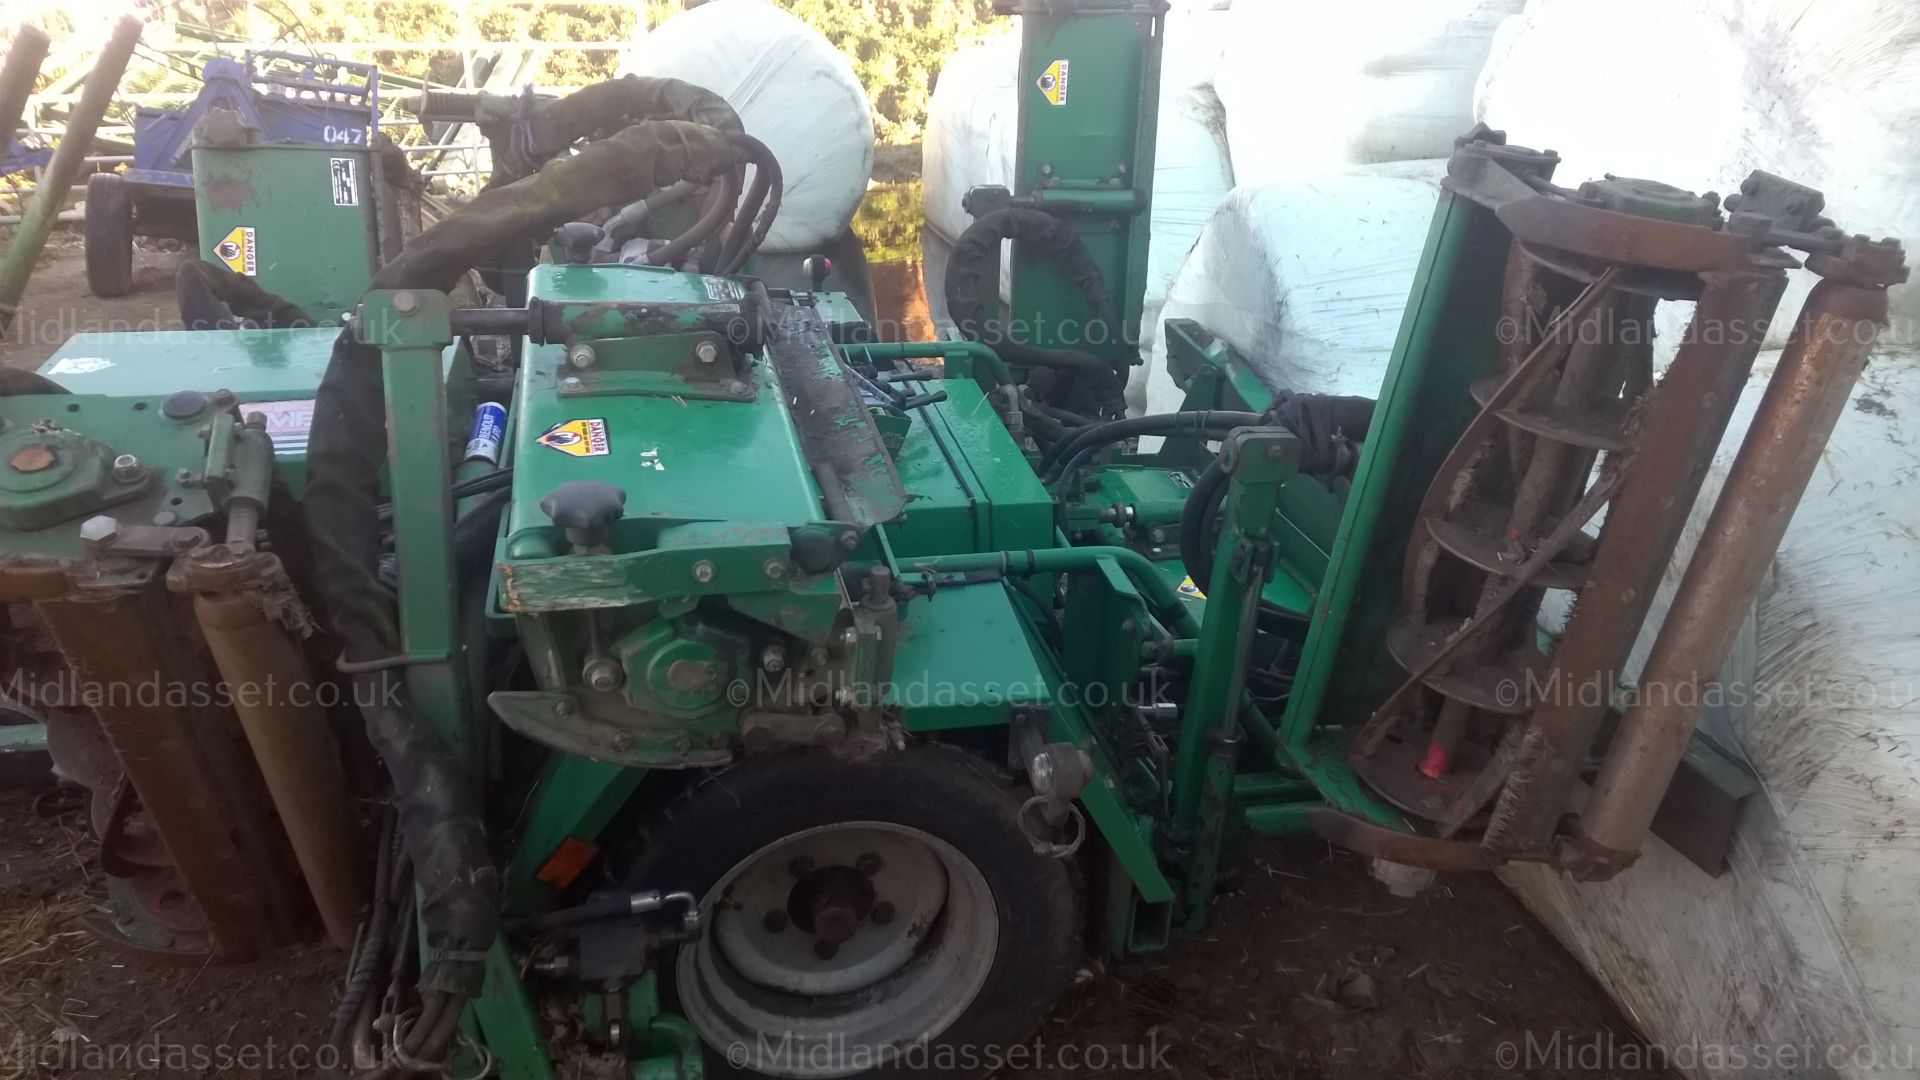 DS - RANSOMES TEXTRON TG 4650 GANG MOWER   EX COUNCIL GOOD WORKING ORDER COLLECTION FROM - Image 5 of 8